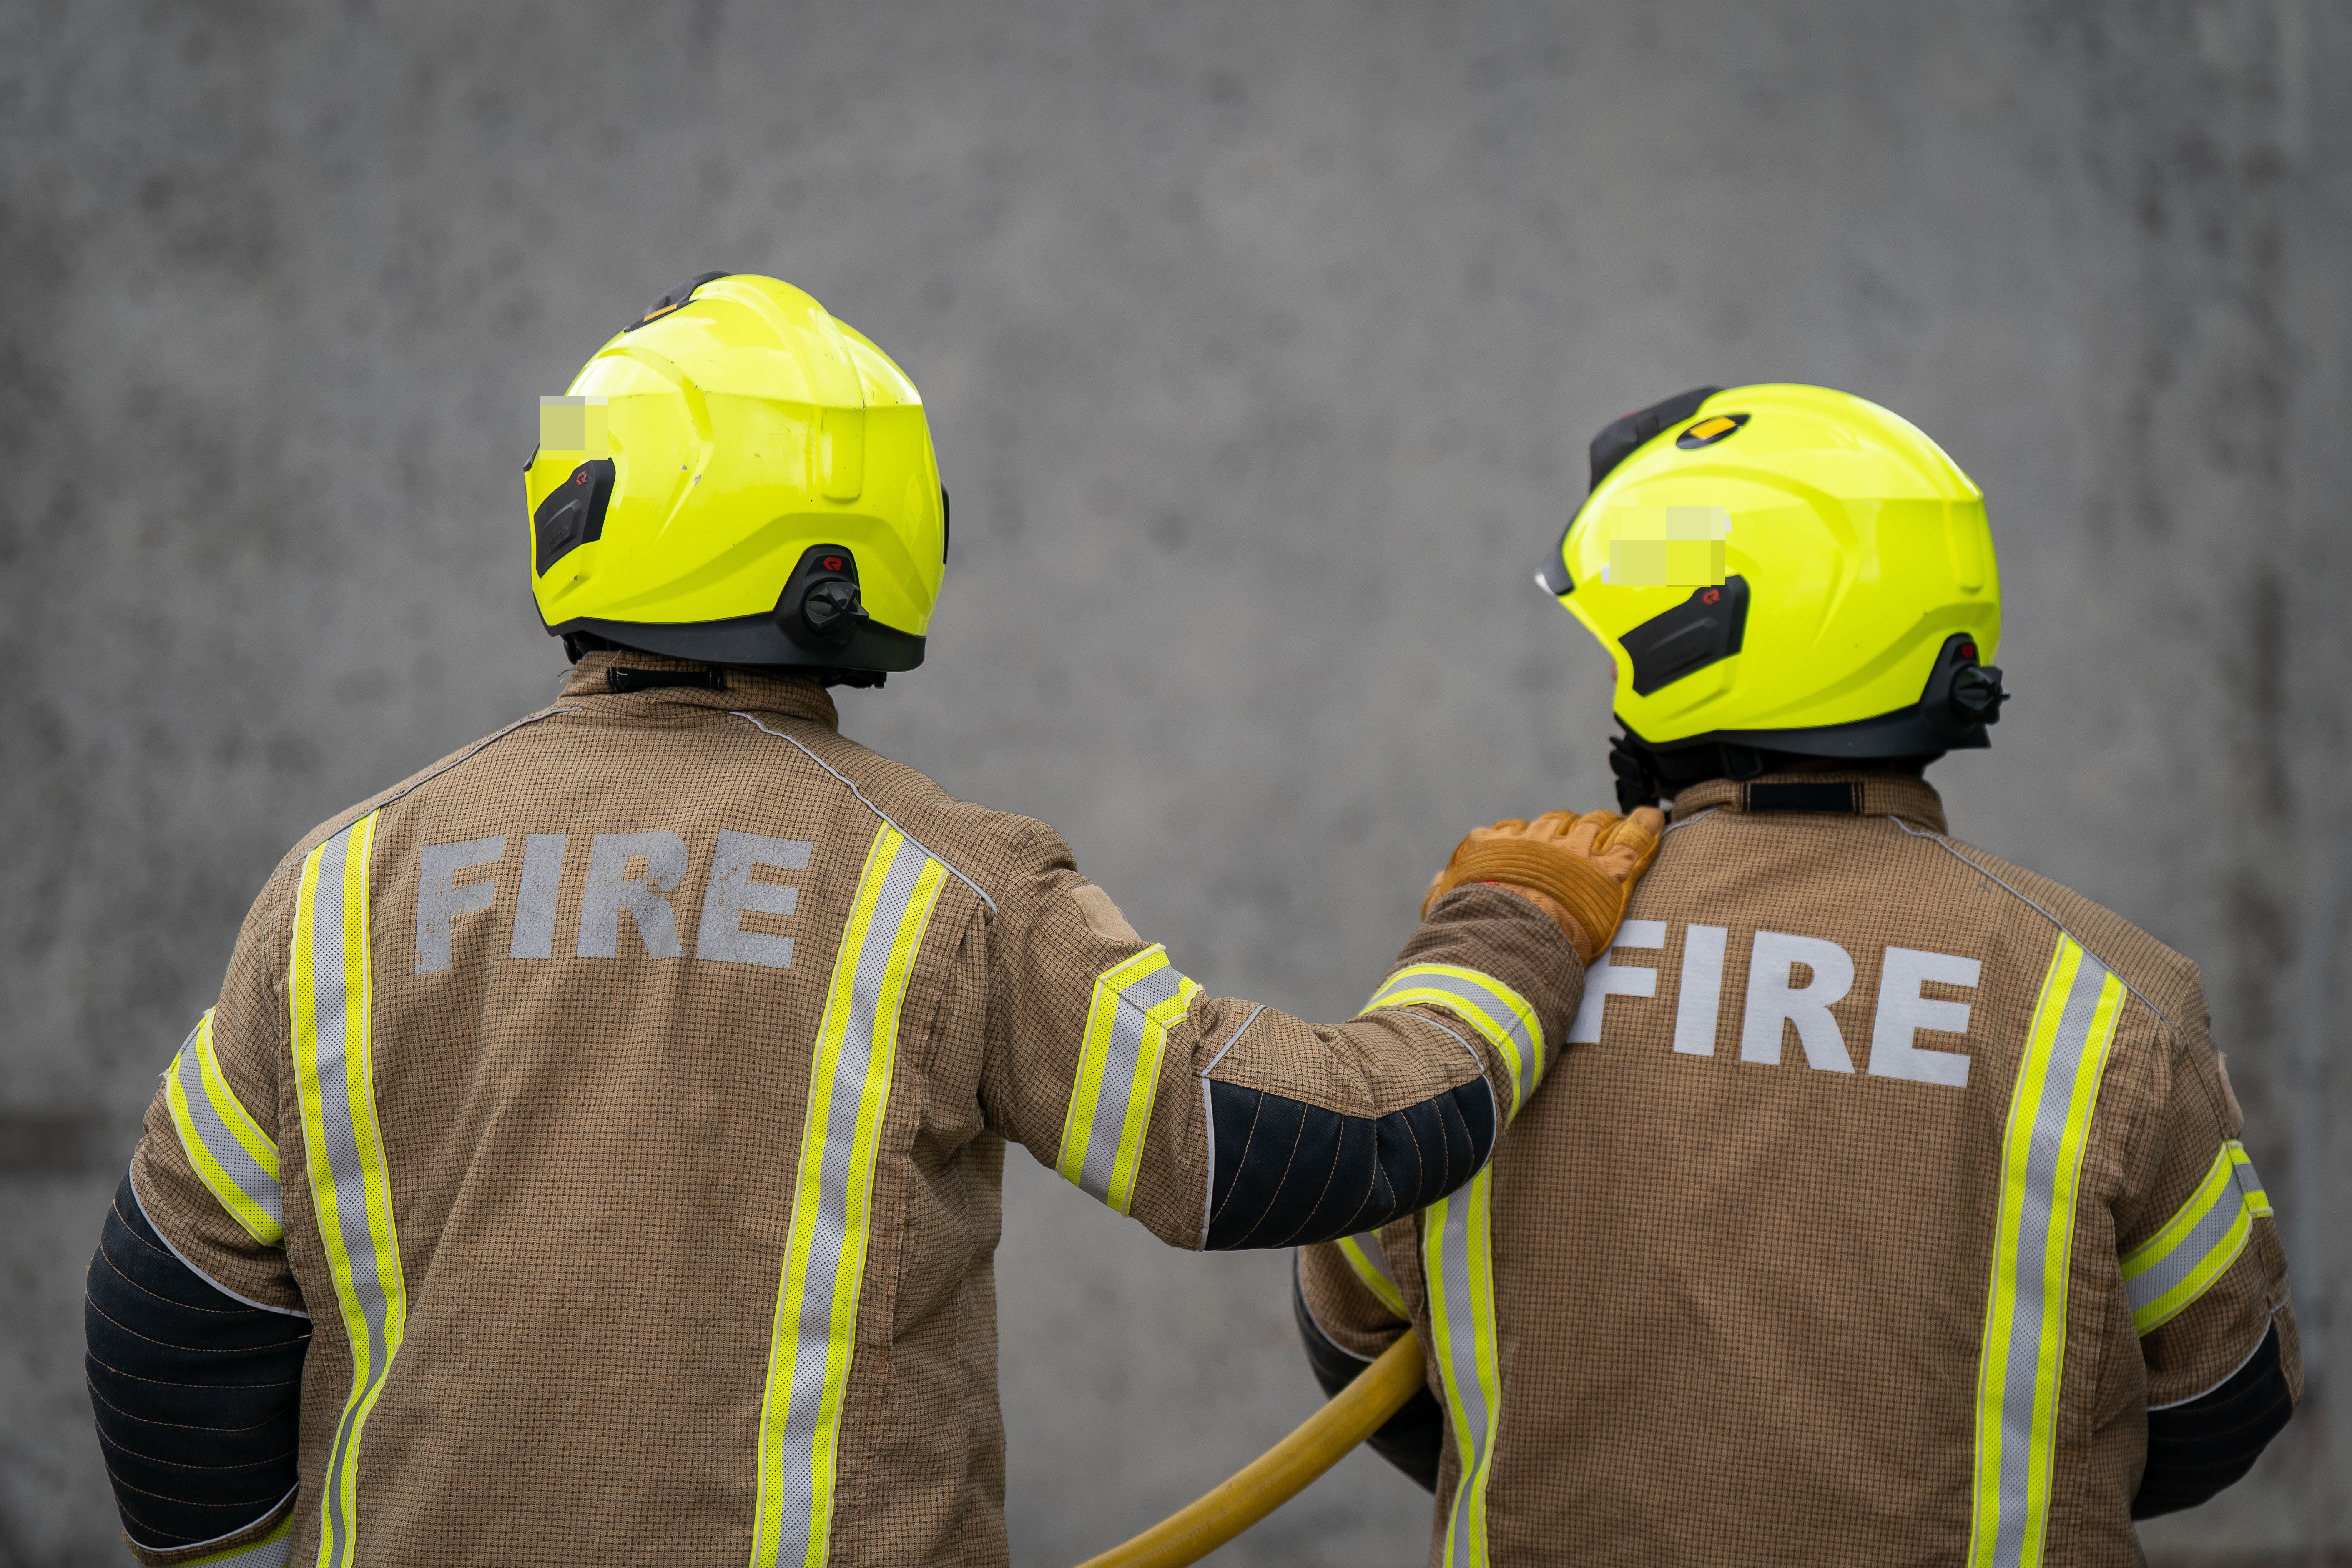 A report has called for an overhaul of vetting and misconduct processes for firefighters